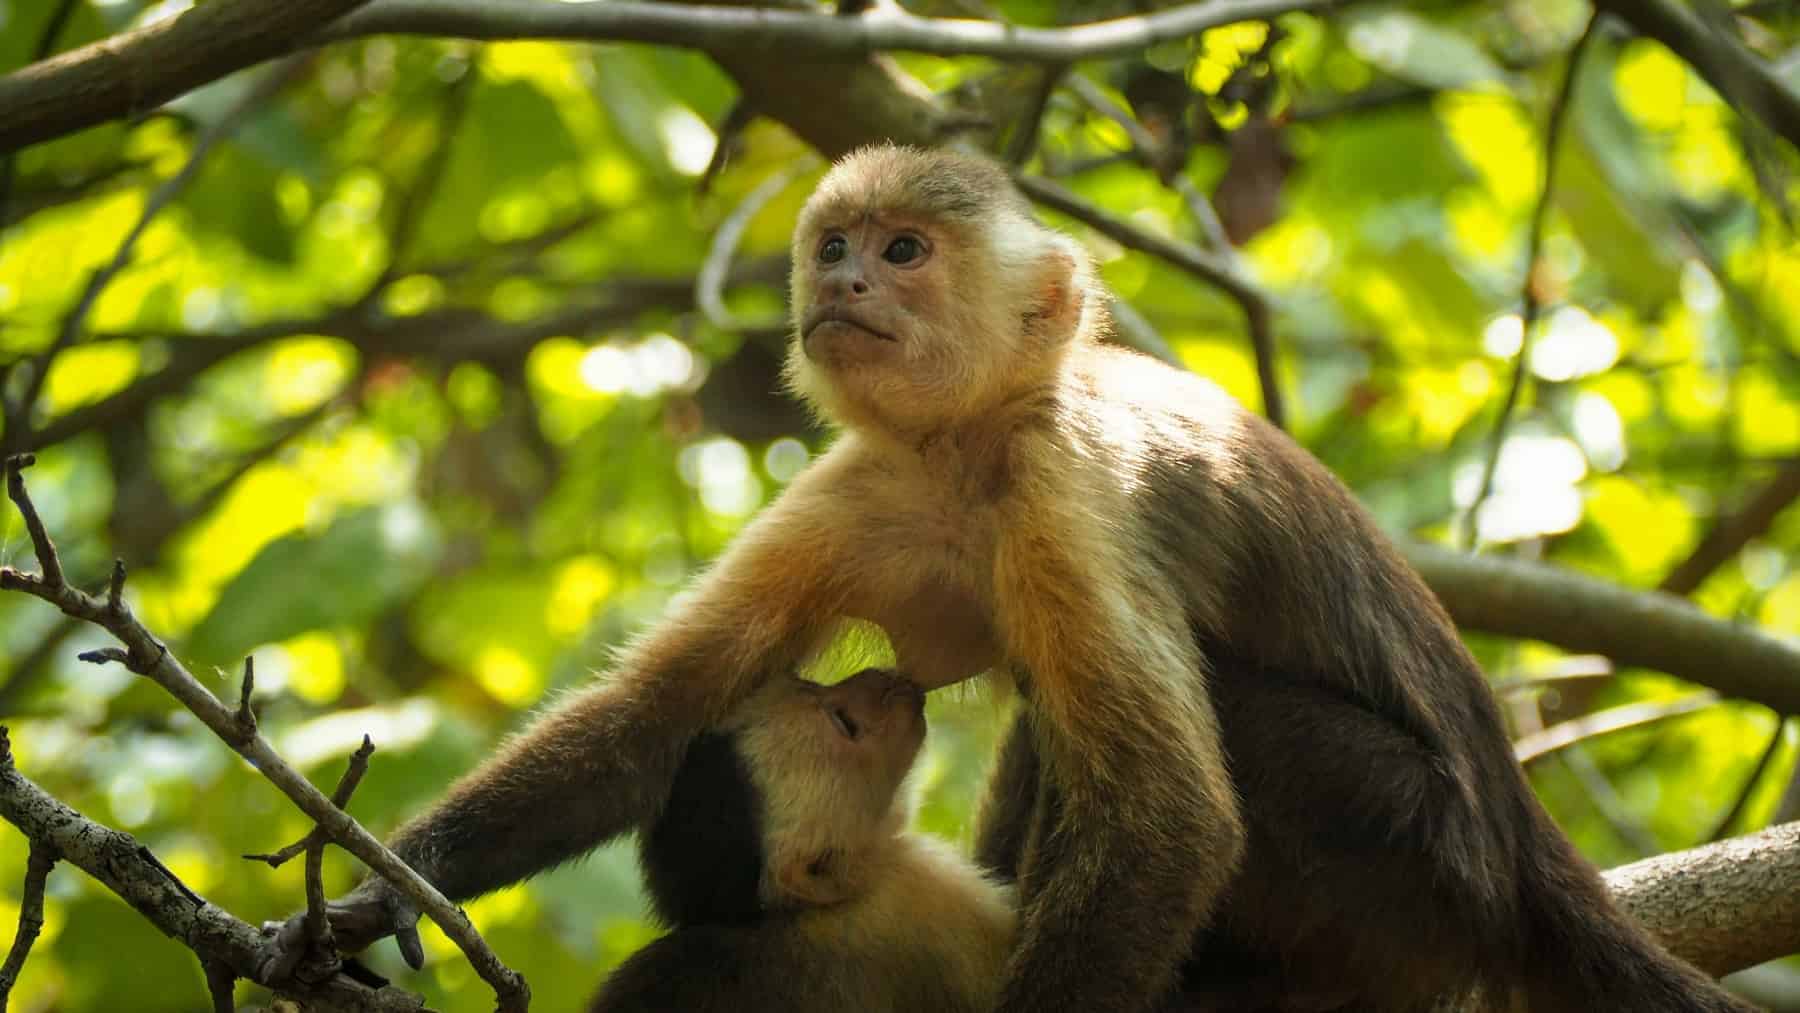 monkey mother breastfeeding her baby in the trees